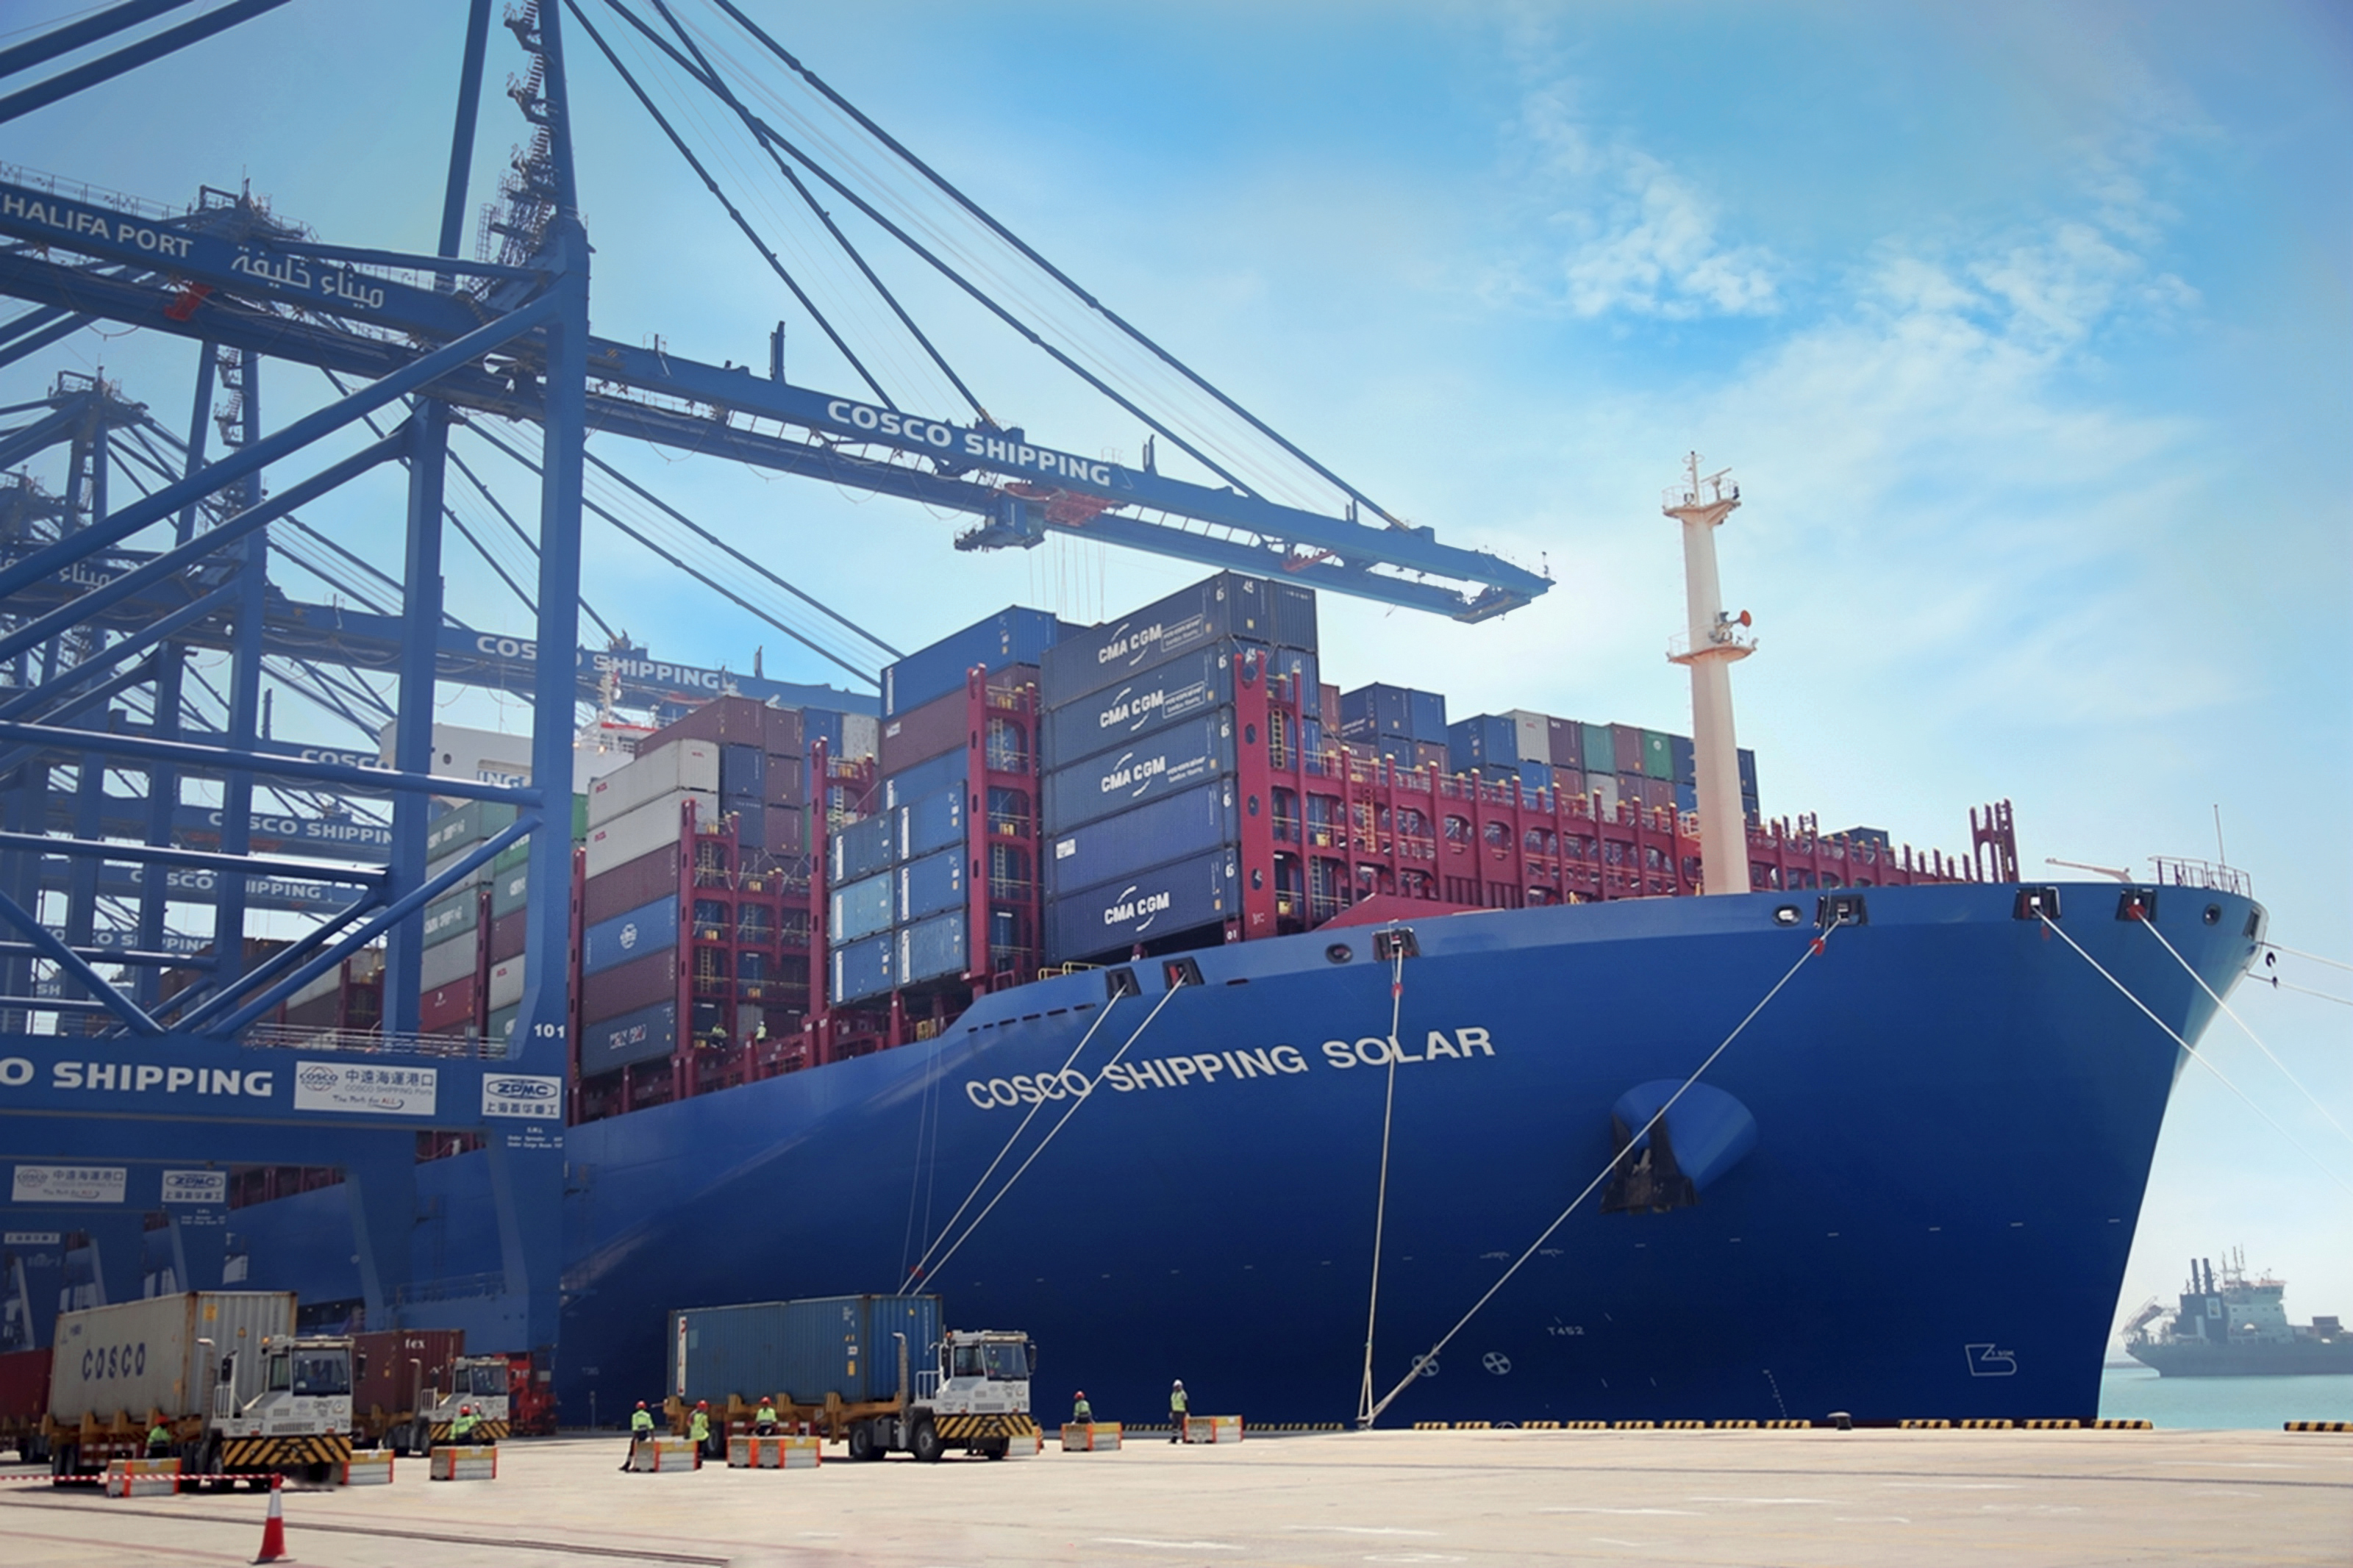 King Abdul Aziz Port receives largest container ship in Saudi history - Logistics Middle East